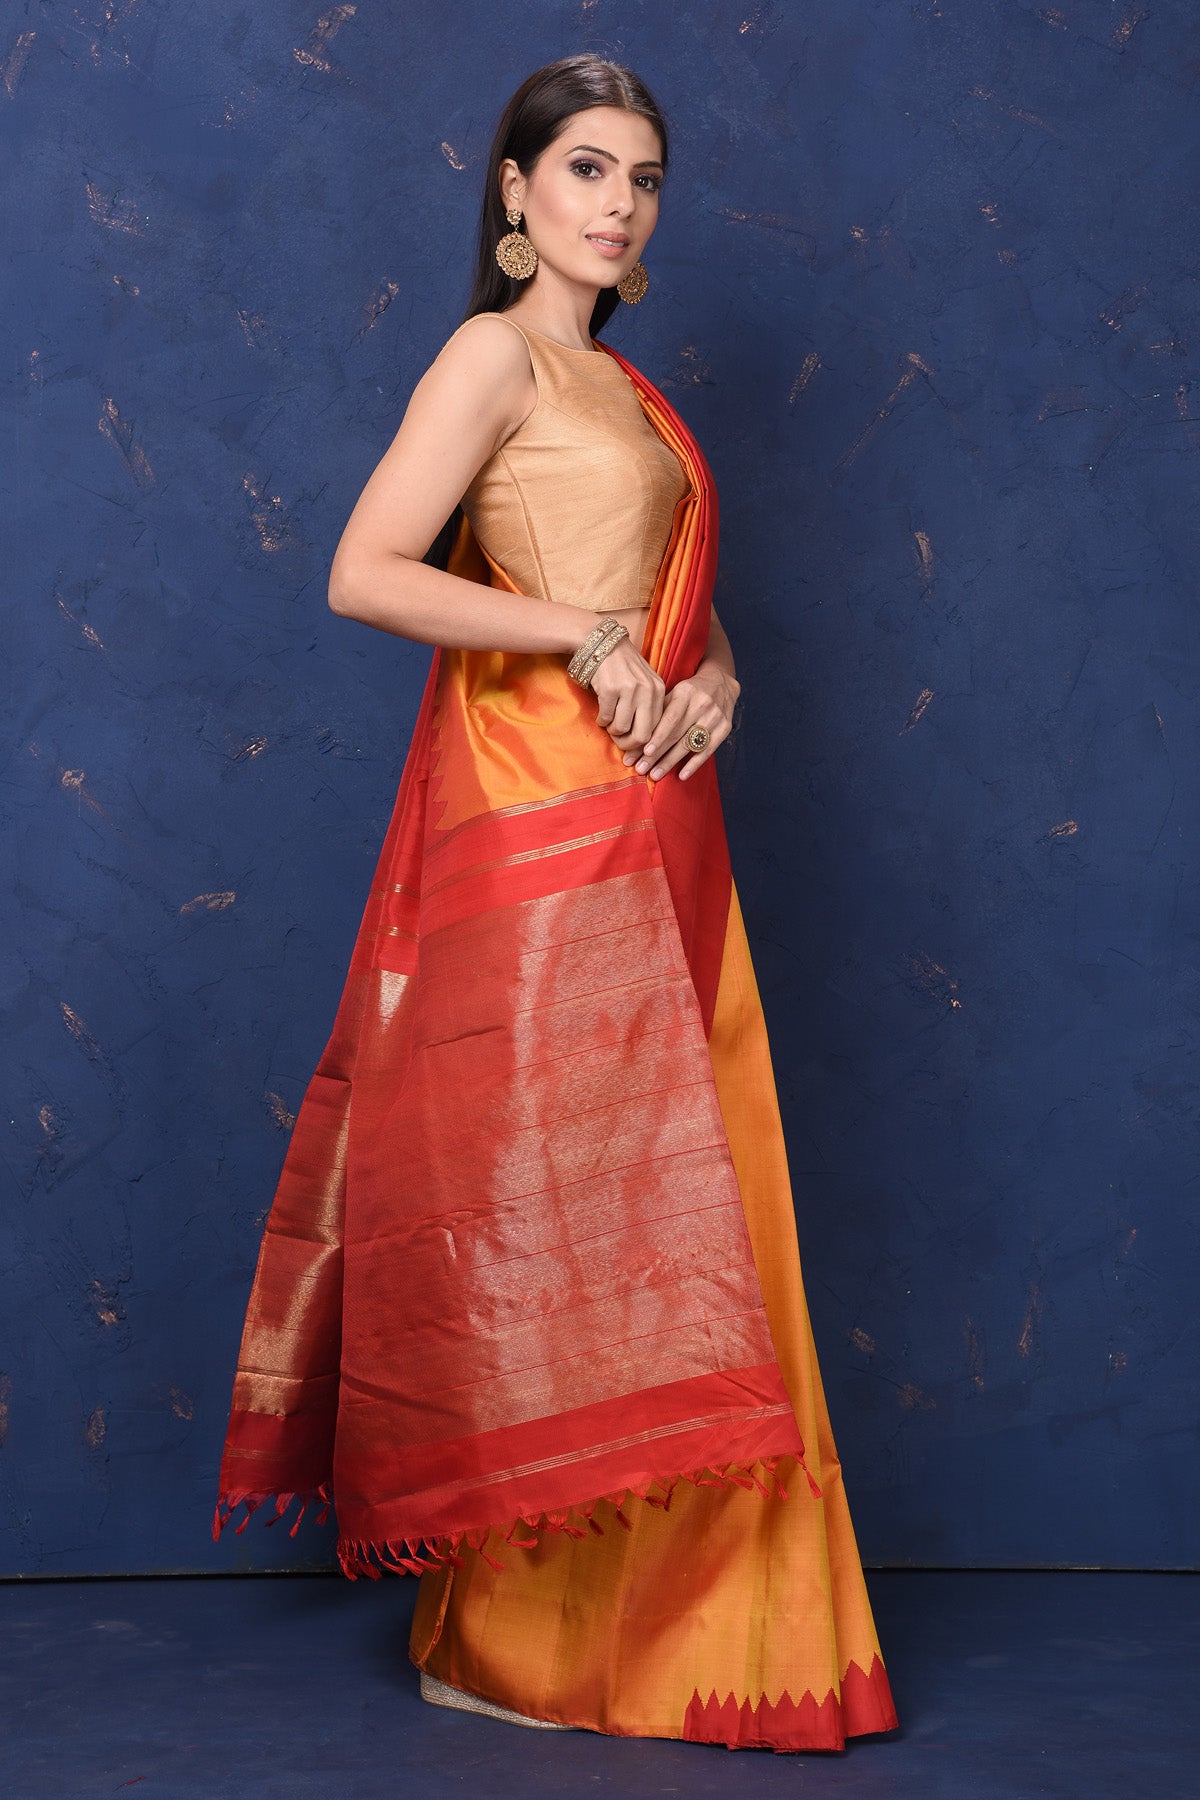 Buy beautiful orange Kanjivaram silk saree online in USA with red temple border. Flaunt your ethnic style at weddings and festive occasions in exquisite Indian sarees, Kanjeevaram sarees, handloom sarees, designer sarees, embroidered sarees from Pure Elegance Indian saree store in USA.-right